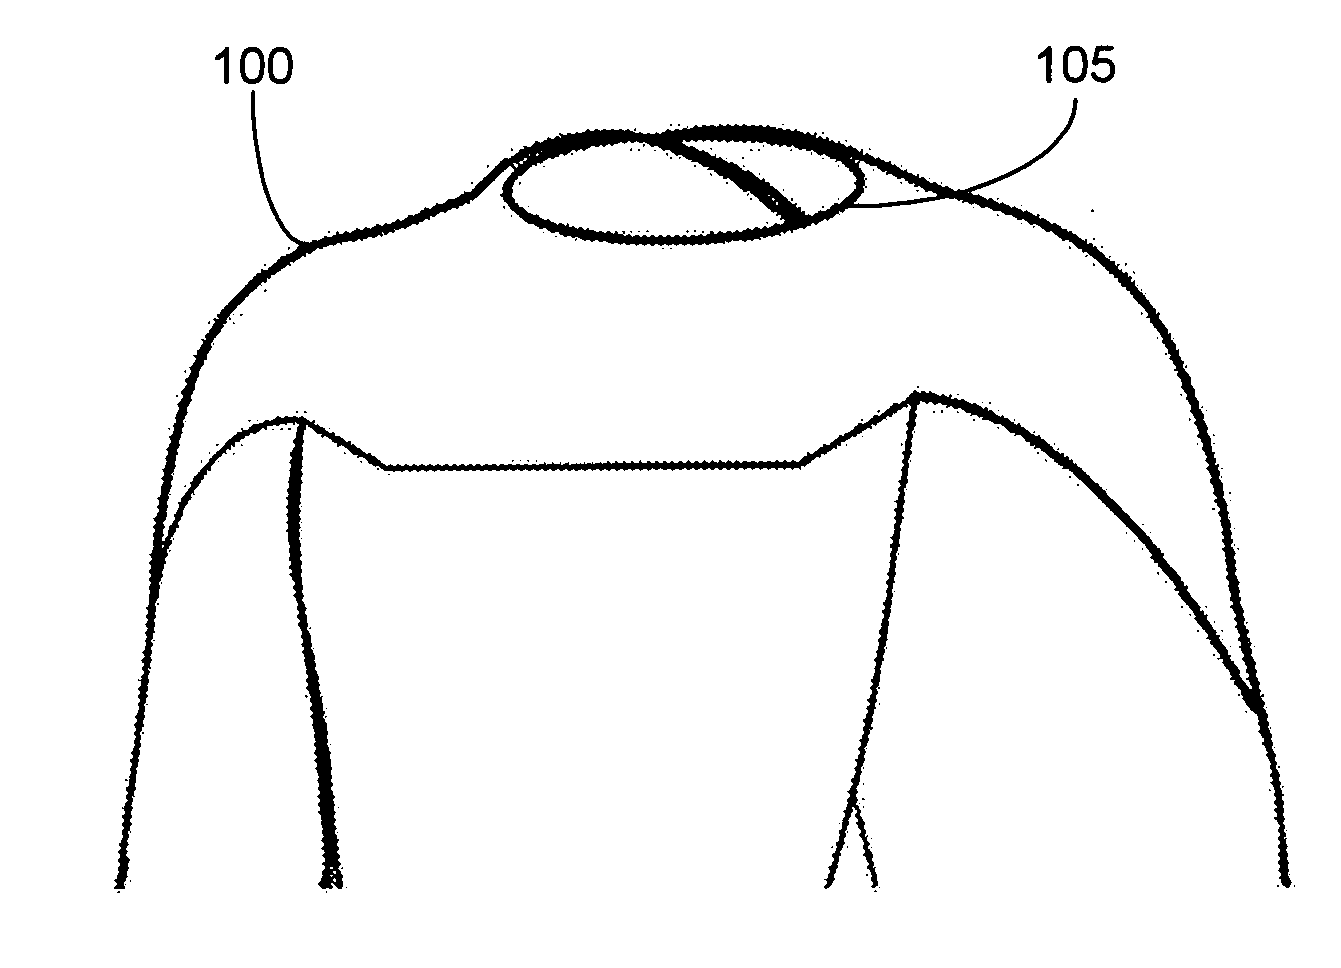 Neck closure system for a wetsuit